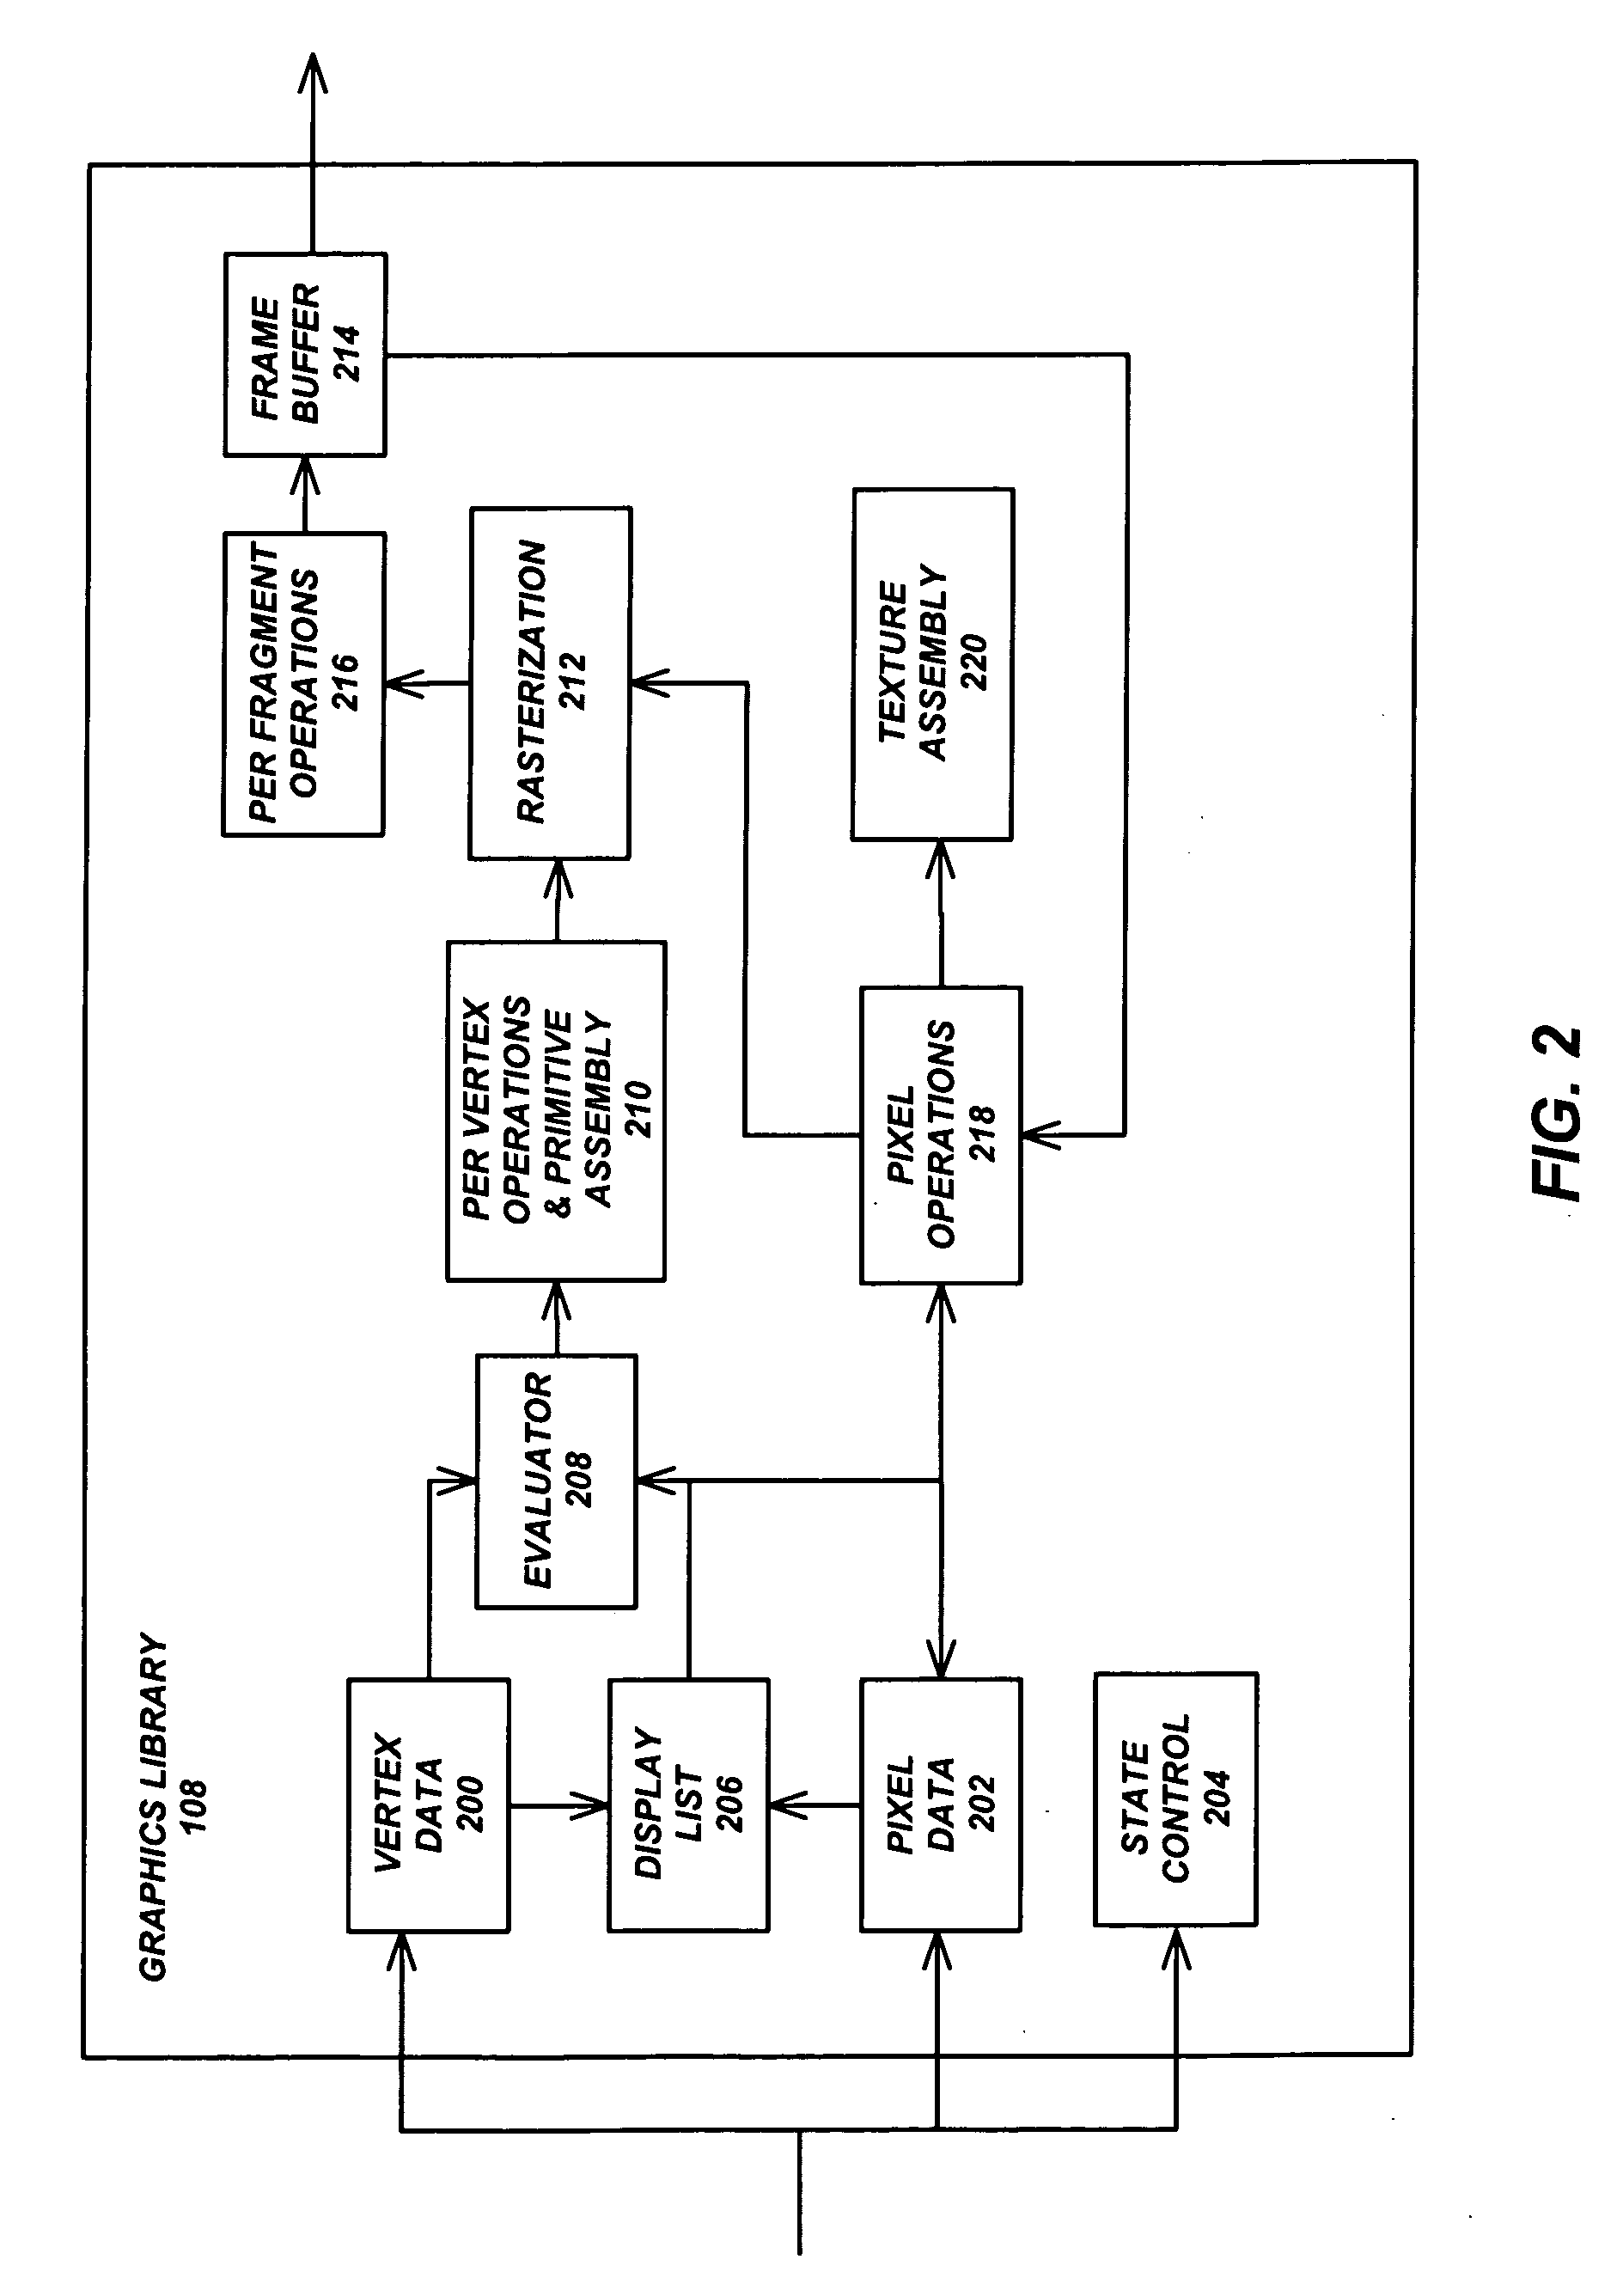 Application-independent method for capturing three-dimensional model data and structure for viewing and manipulation